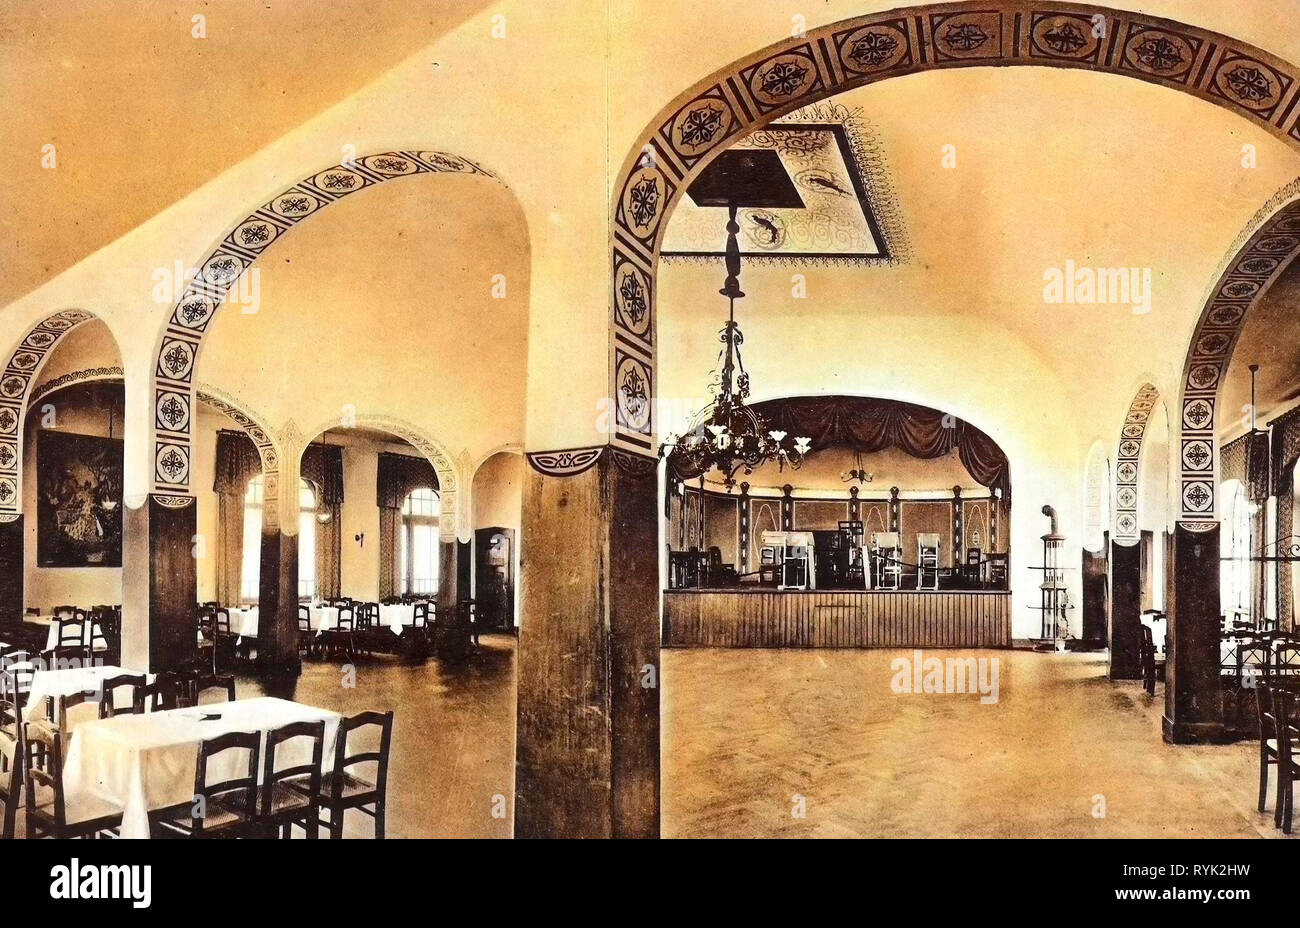 Hotels in Saxony, Dining rooms in Germany, Ballrooms in Germany, Buildings in Landkreis Sächsische Schweiz-Osterzgebirge, 1914, Landkreis Sächsische Schweiz-Osterzgebirge, Kipsdorf, Hotel Tellkoppe, Saal Stock Photo